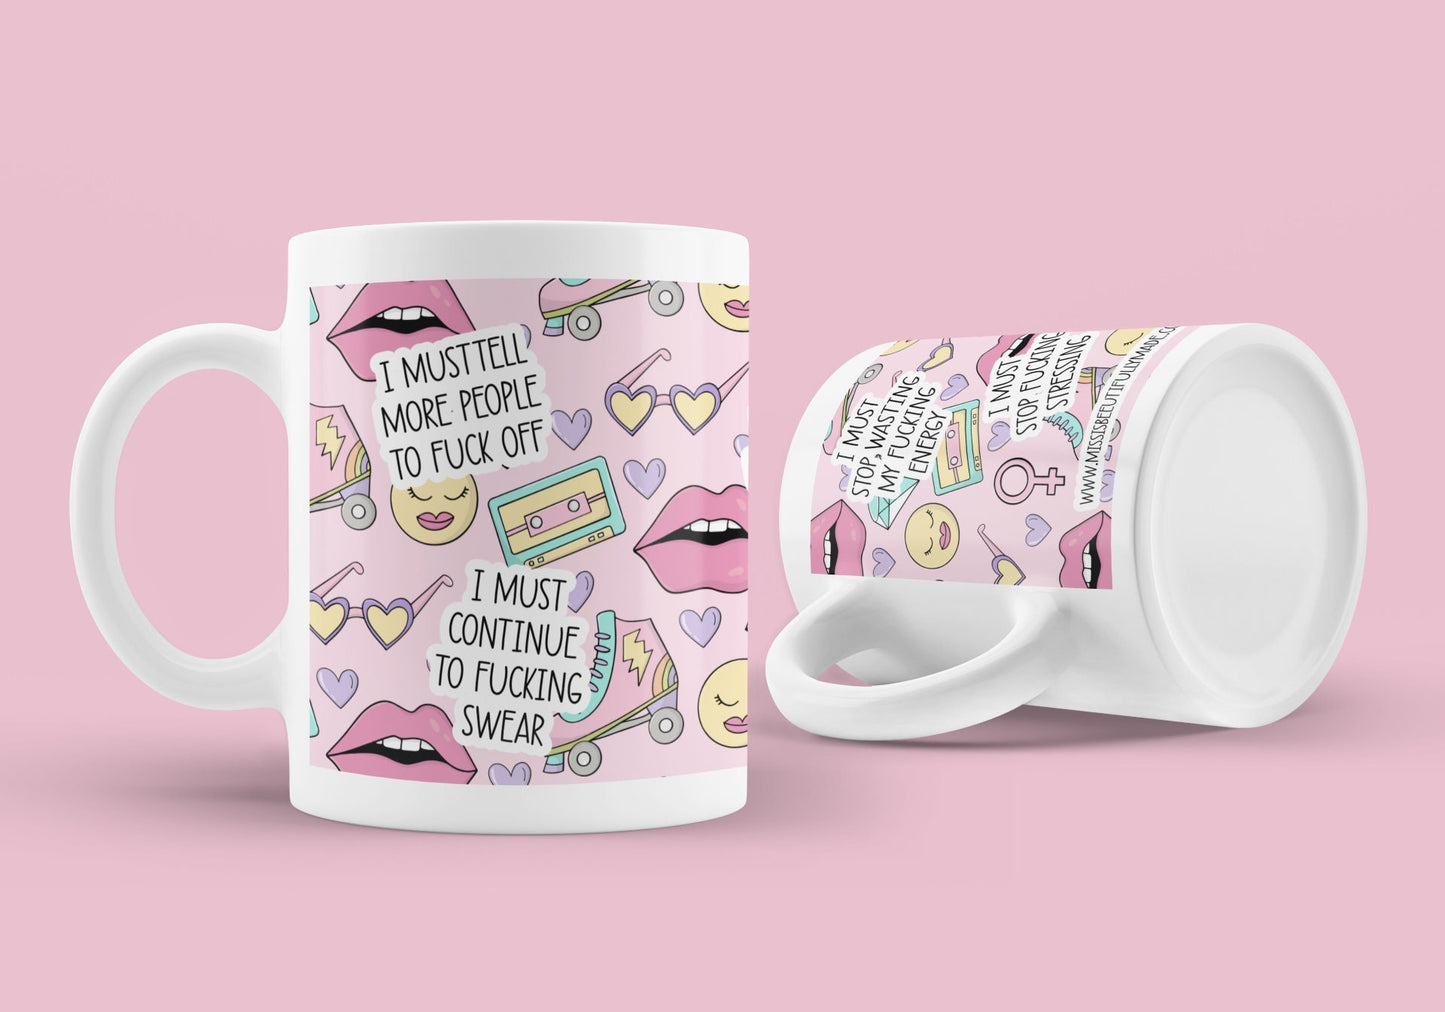 White ceramic mug with a pink printed retro design. Funny I must affirmation quotes are printed around the whole mug i.e I must continue to fucking swear and i must tell more people to fuck off.